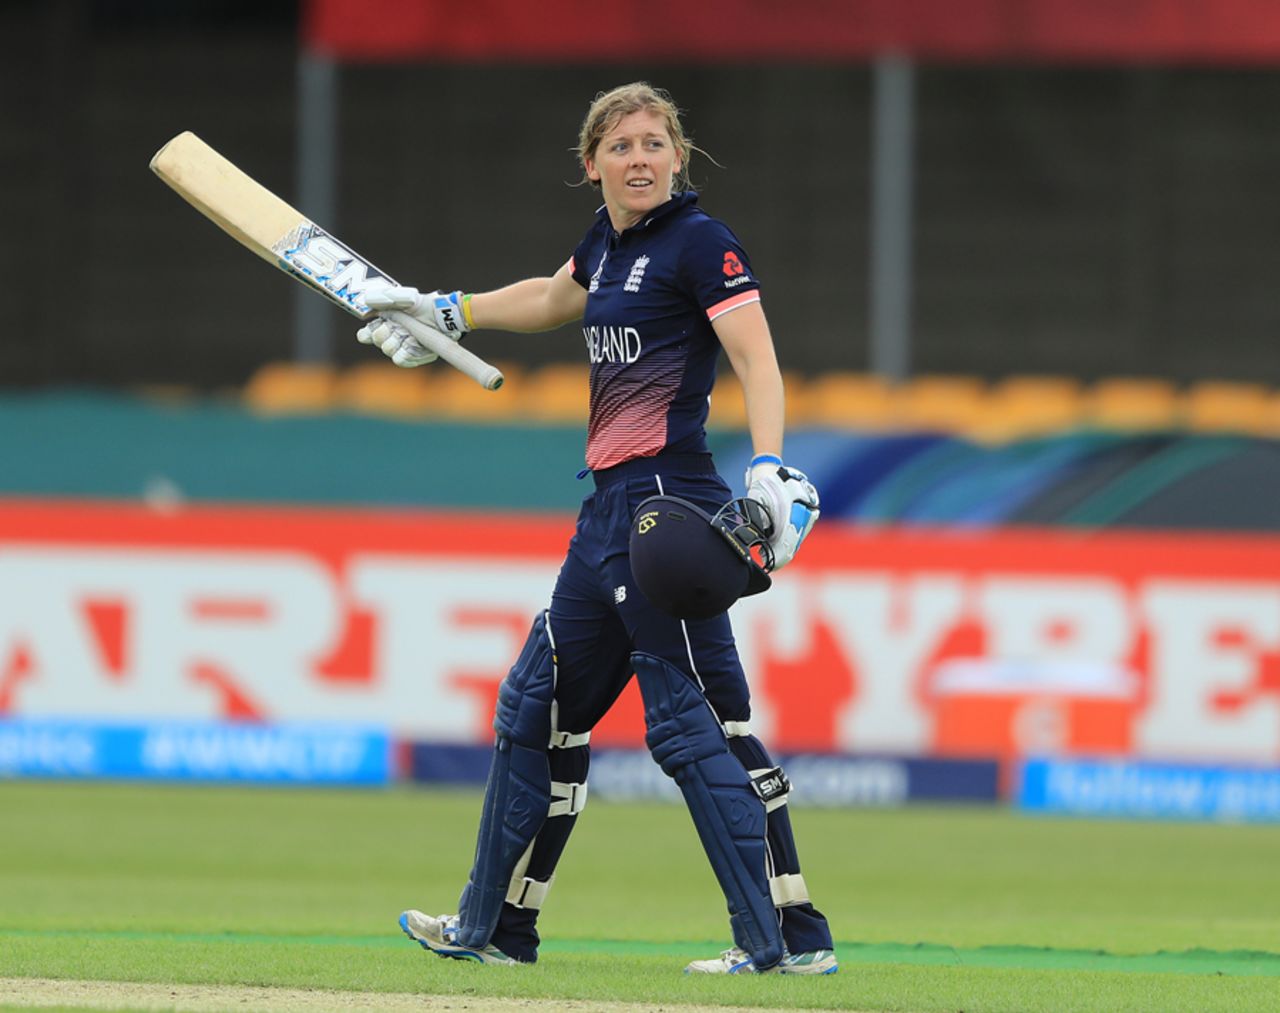 Heather Knight raises her bat after notching up her maiden ODI century, England v Pakistan, Women's World Cup, Leicester, June 27, 2017